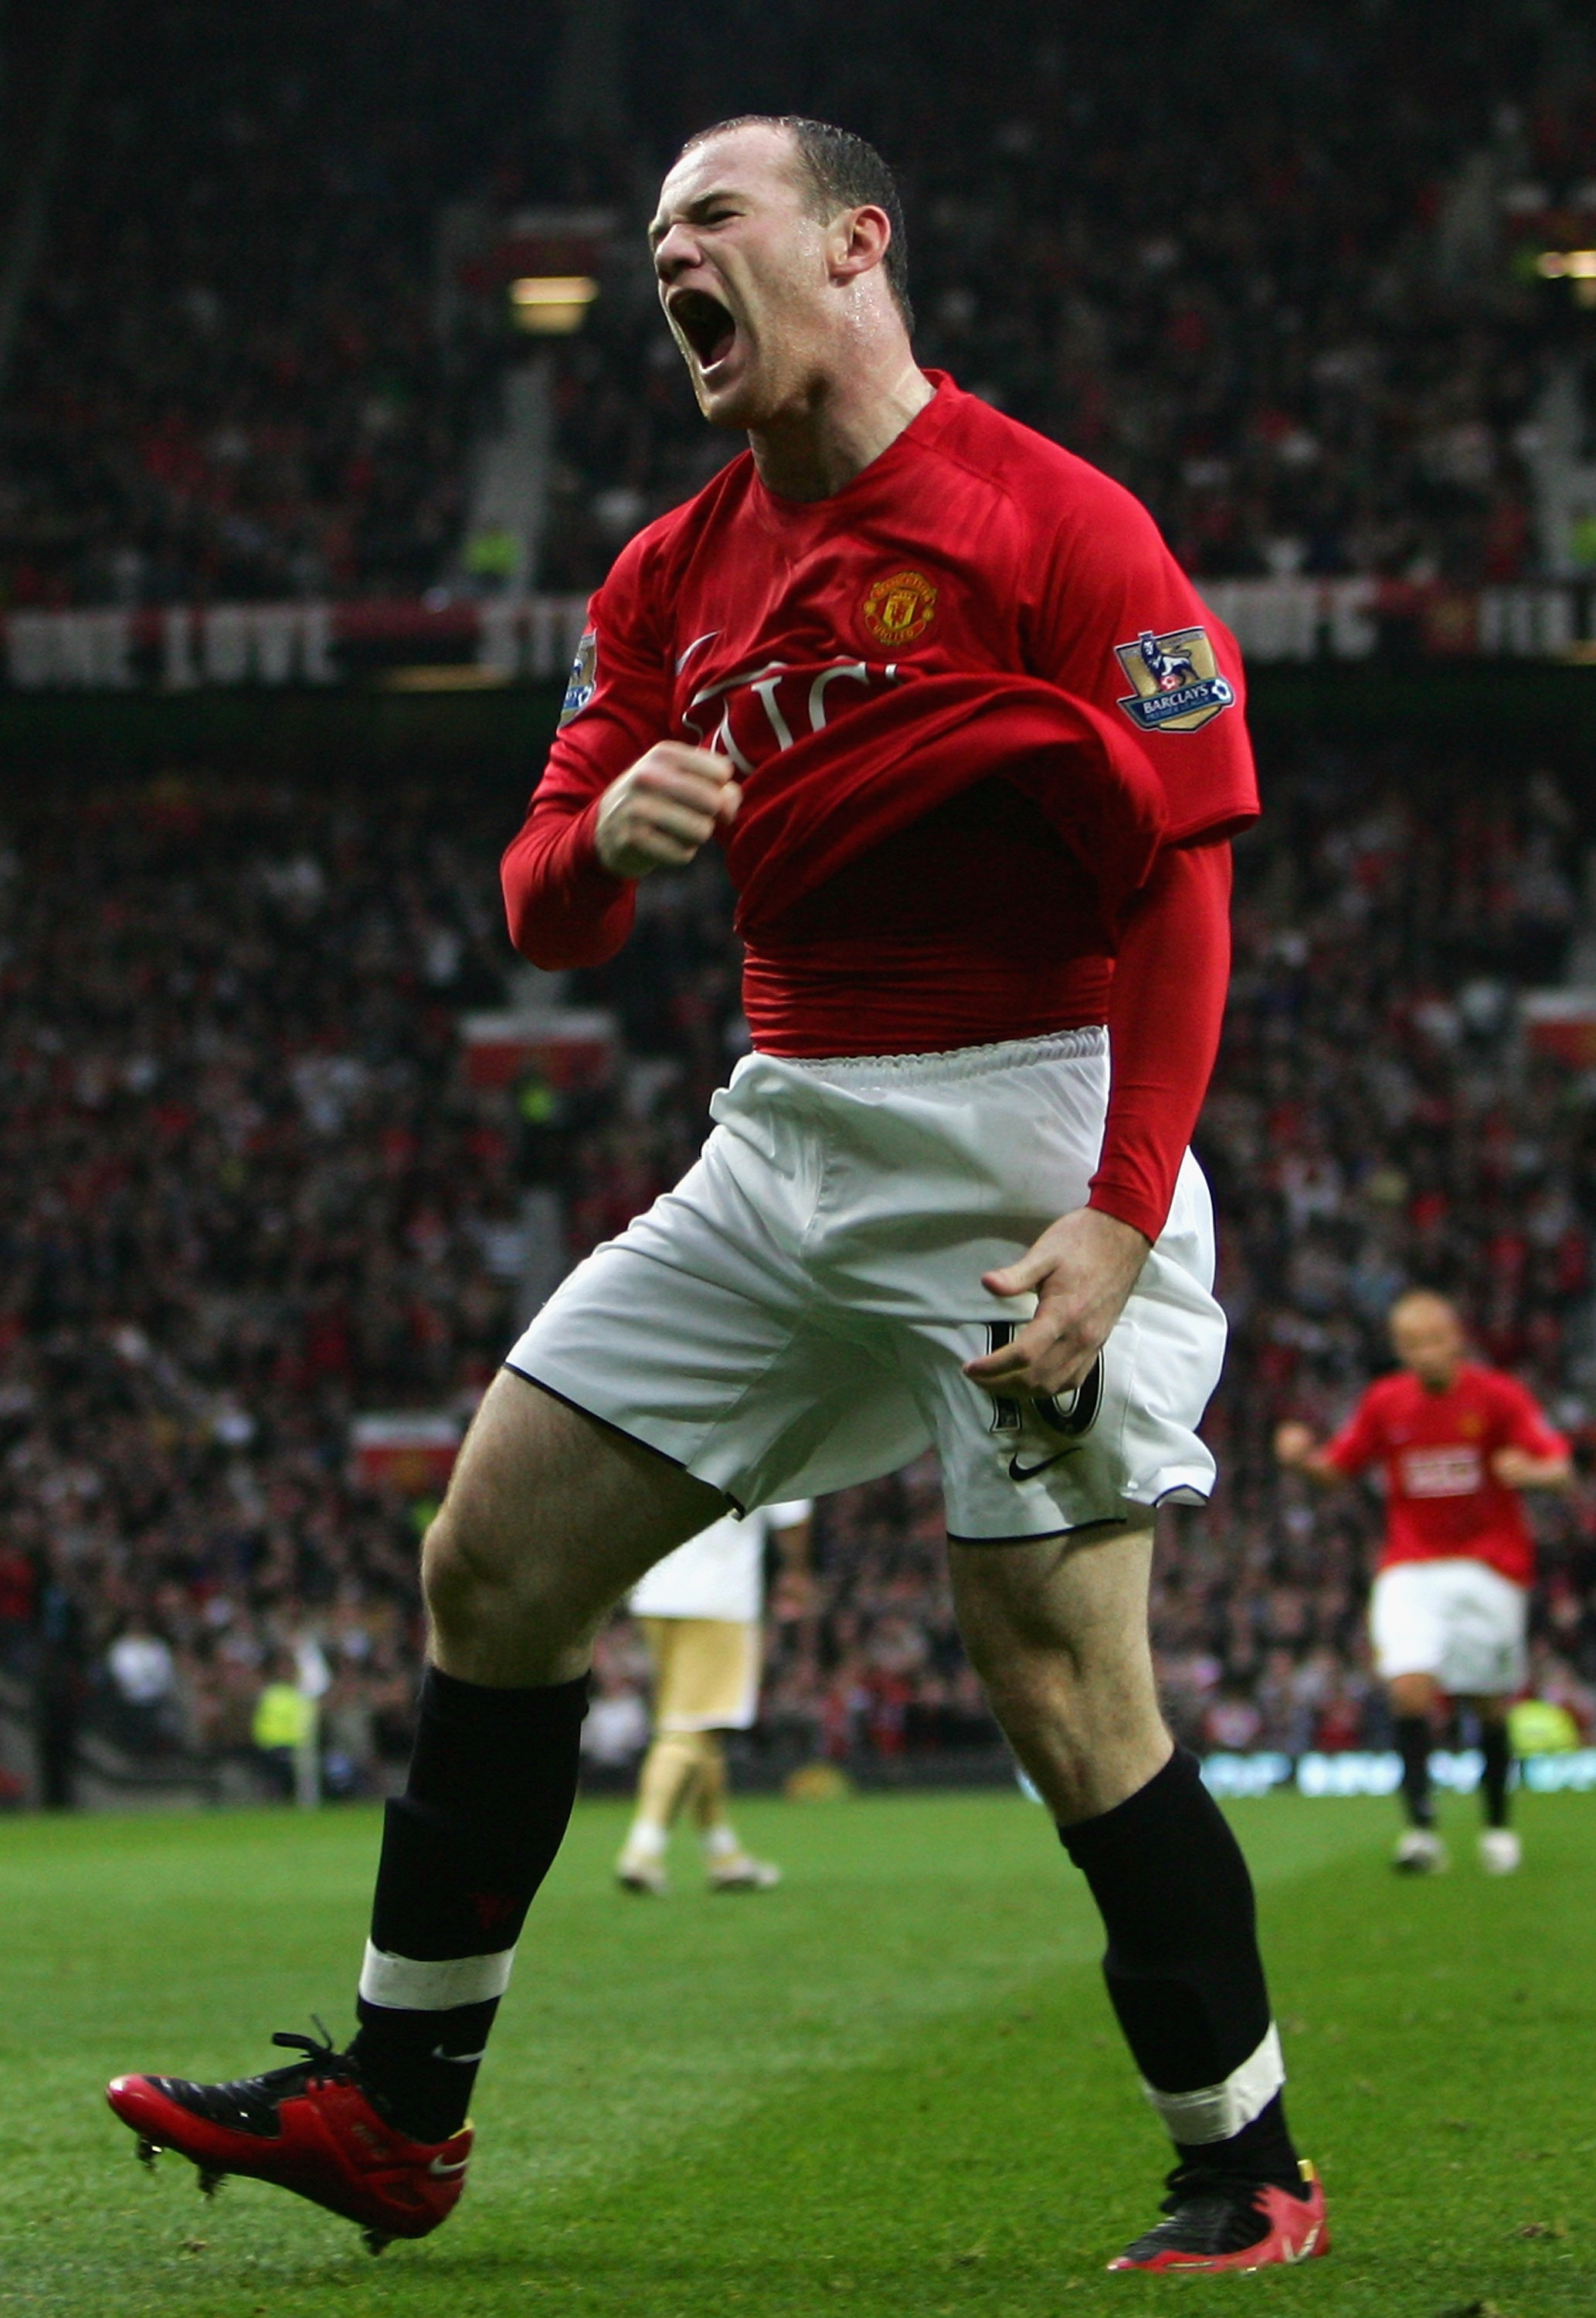 MANCHESTER, UNITED KINGDOM - OCTOBER 27:  Wayne Rooney of Manchester United celebrates scoring his team's second goal during the Barclays Premier League match between Manchester United and Middlesbrough at Old Trafford on October 27, 2007 in Manchester, E